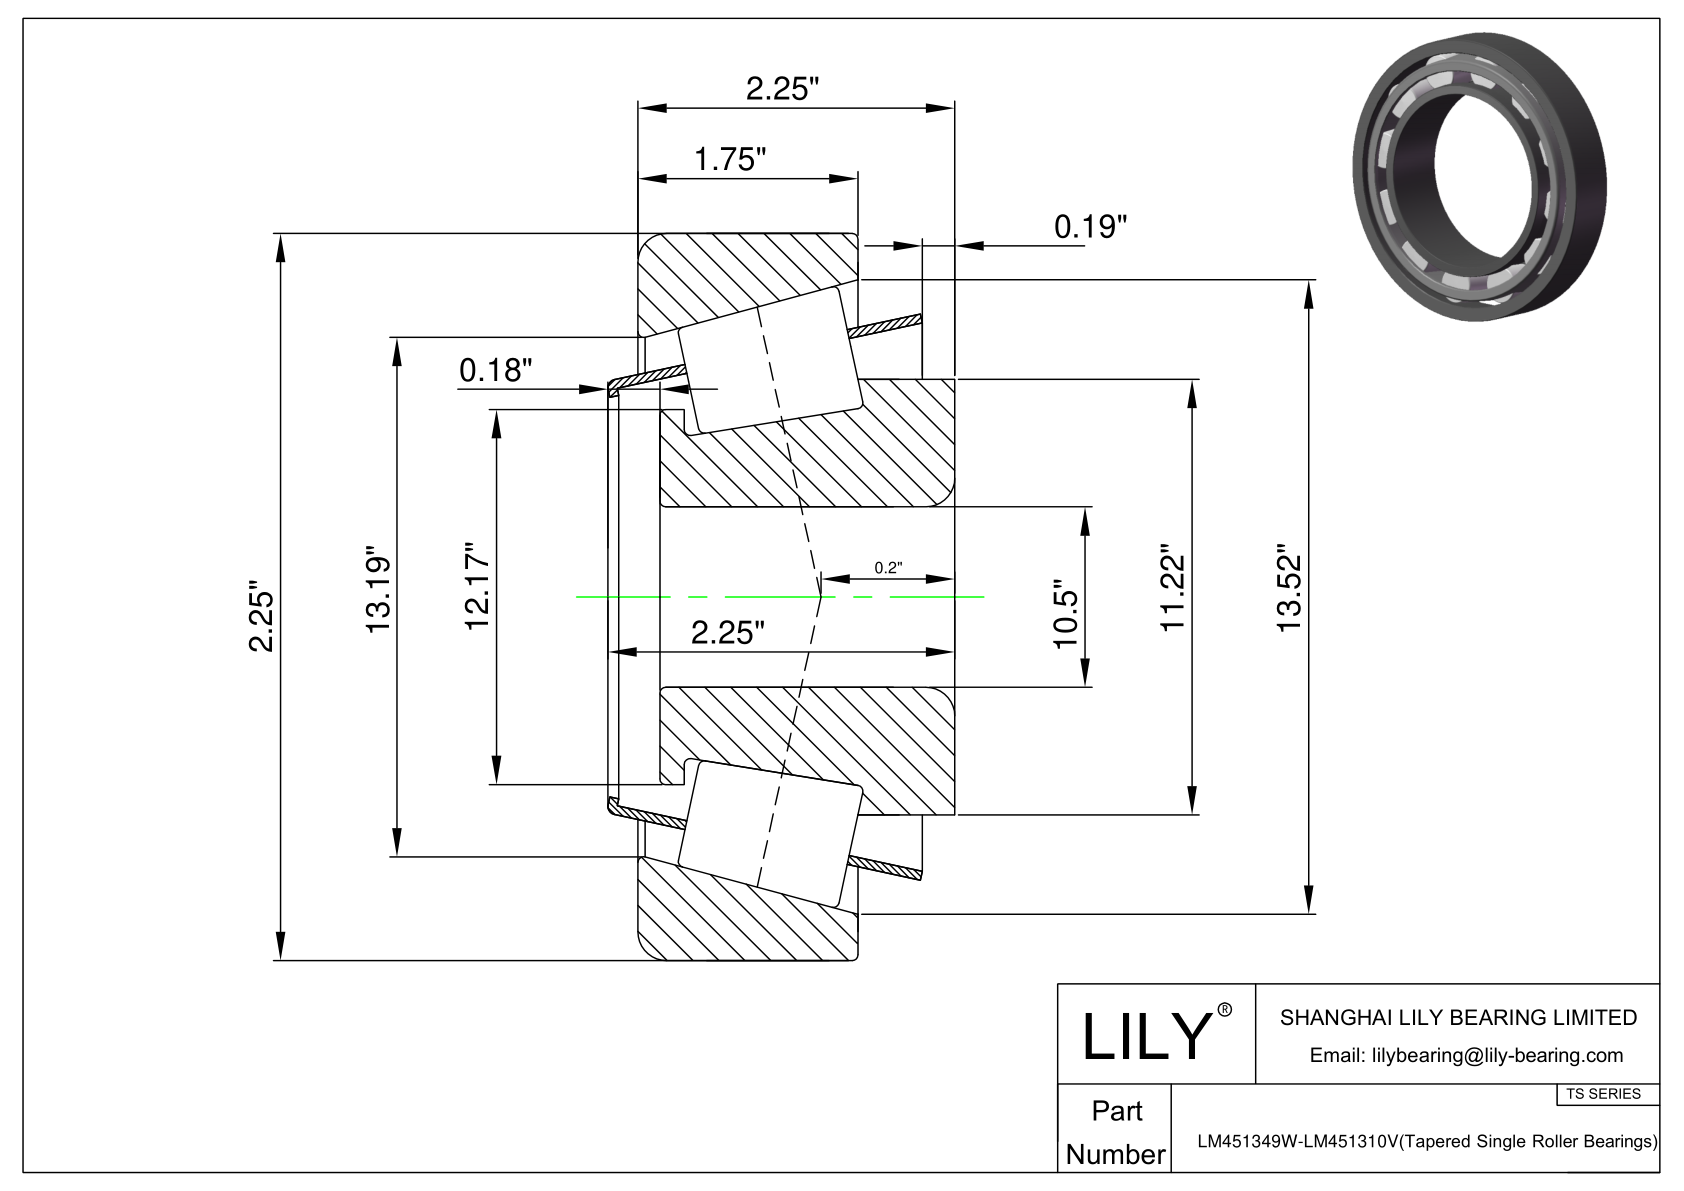 LM451349W-LM451310V TS (Tapered Single Roller Bearings) (Imperial) cad drawing